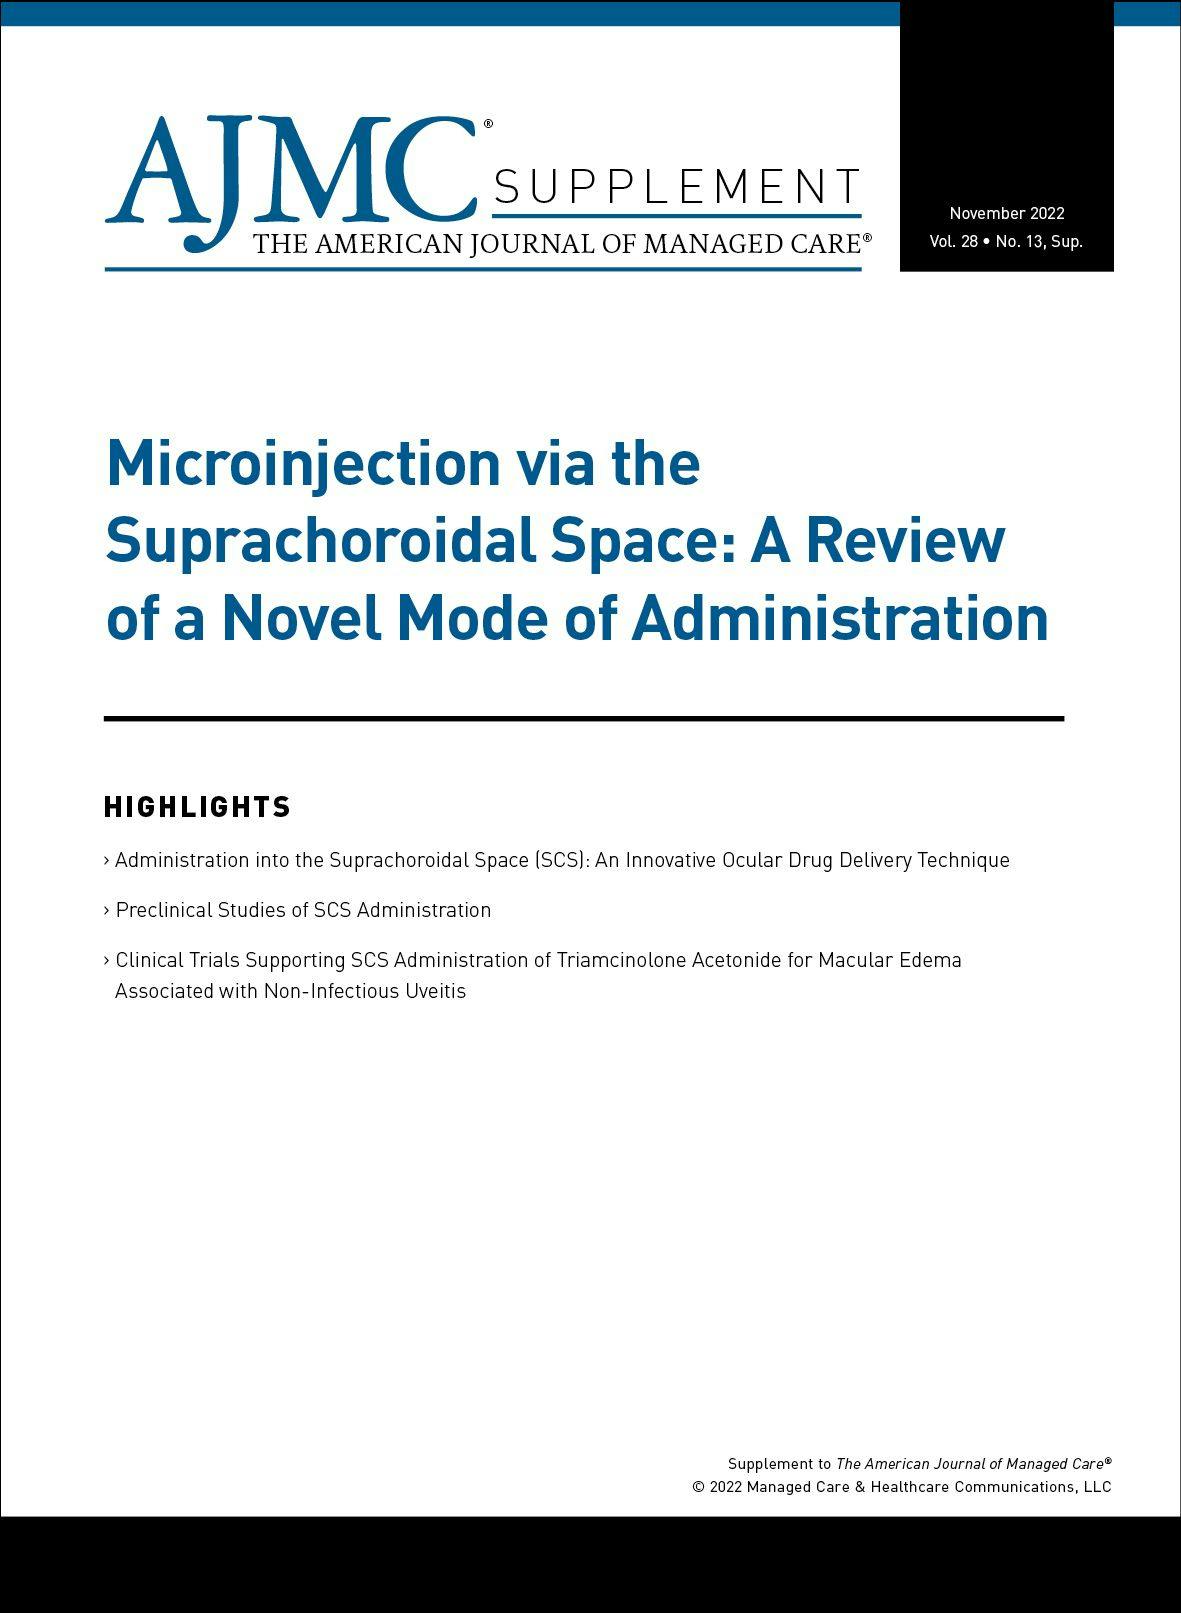 Microinjection via the Suprachoroidal Space: A Review of a Novel Mode of Administration